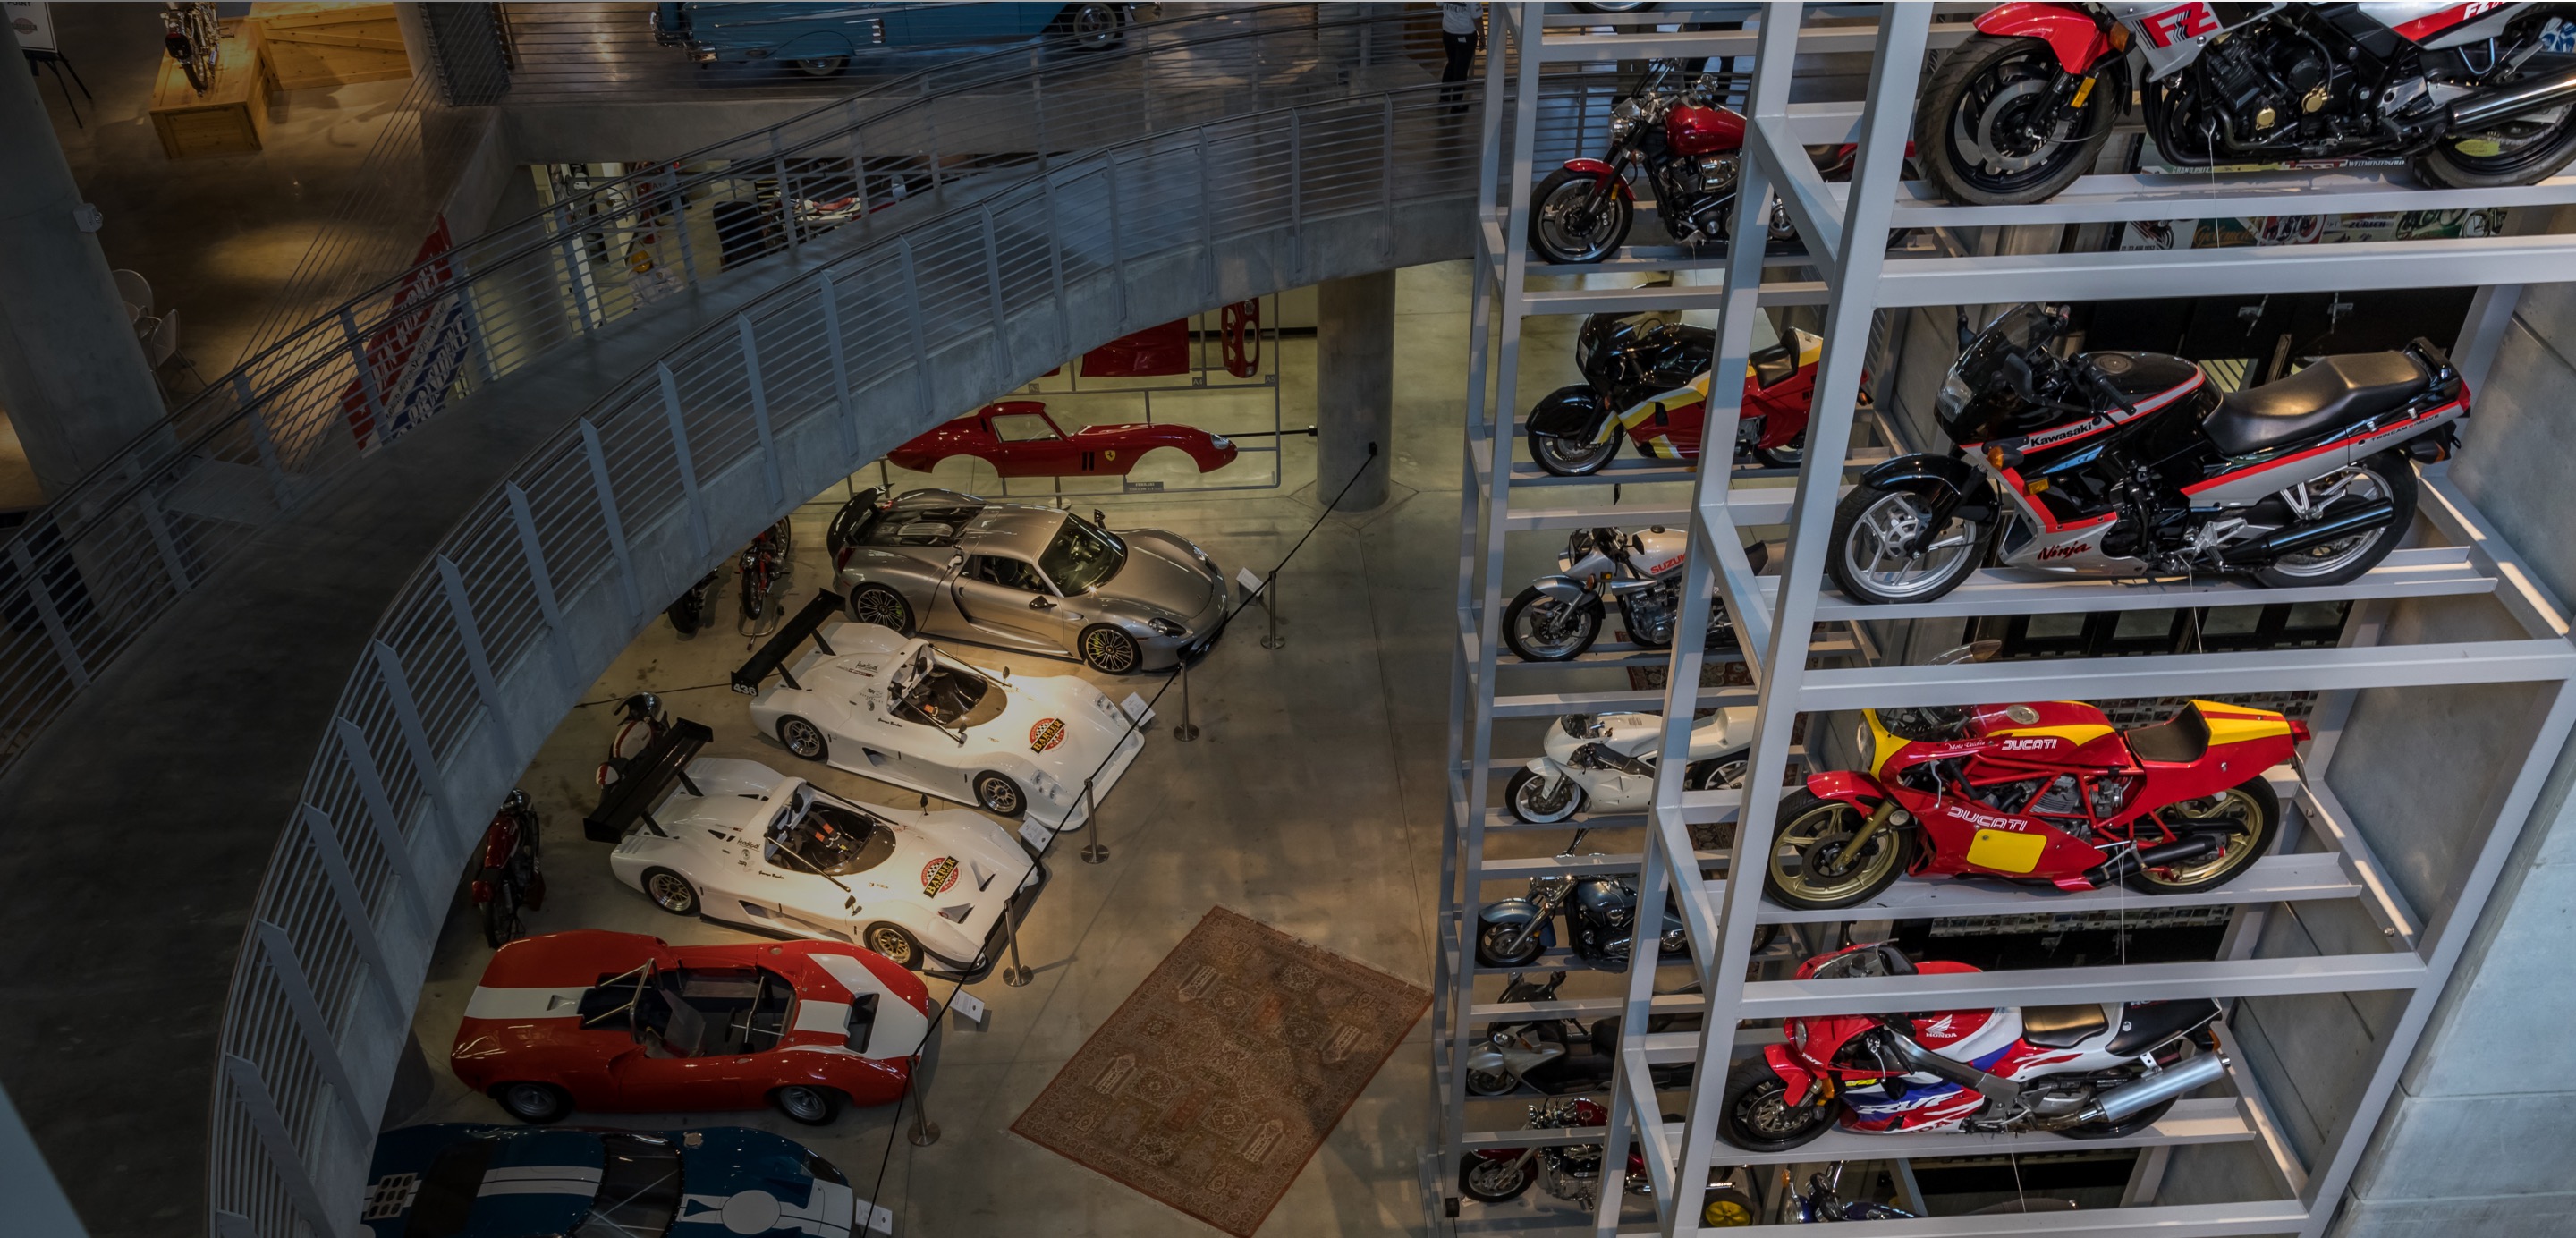 Bird's eye view of vintage race cars and motorcycles inside the Barber Vintage Motorsports Museum